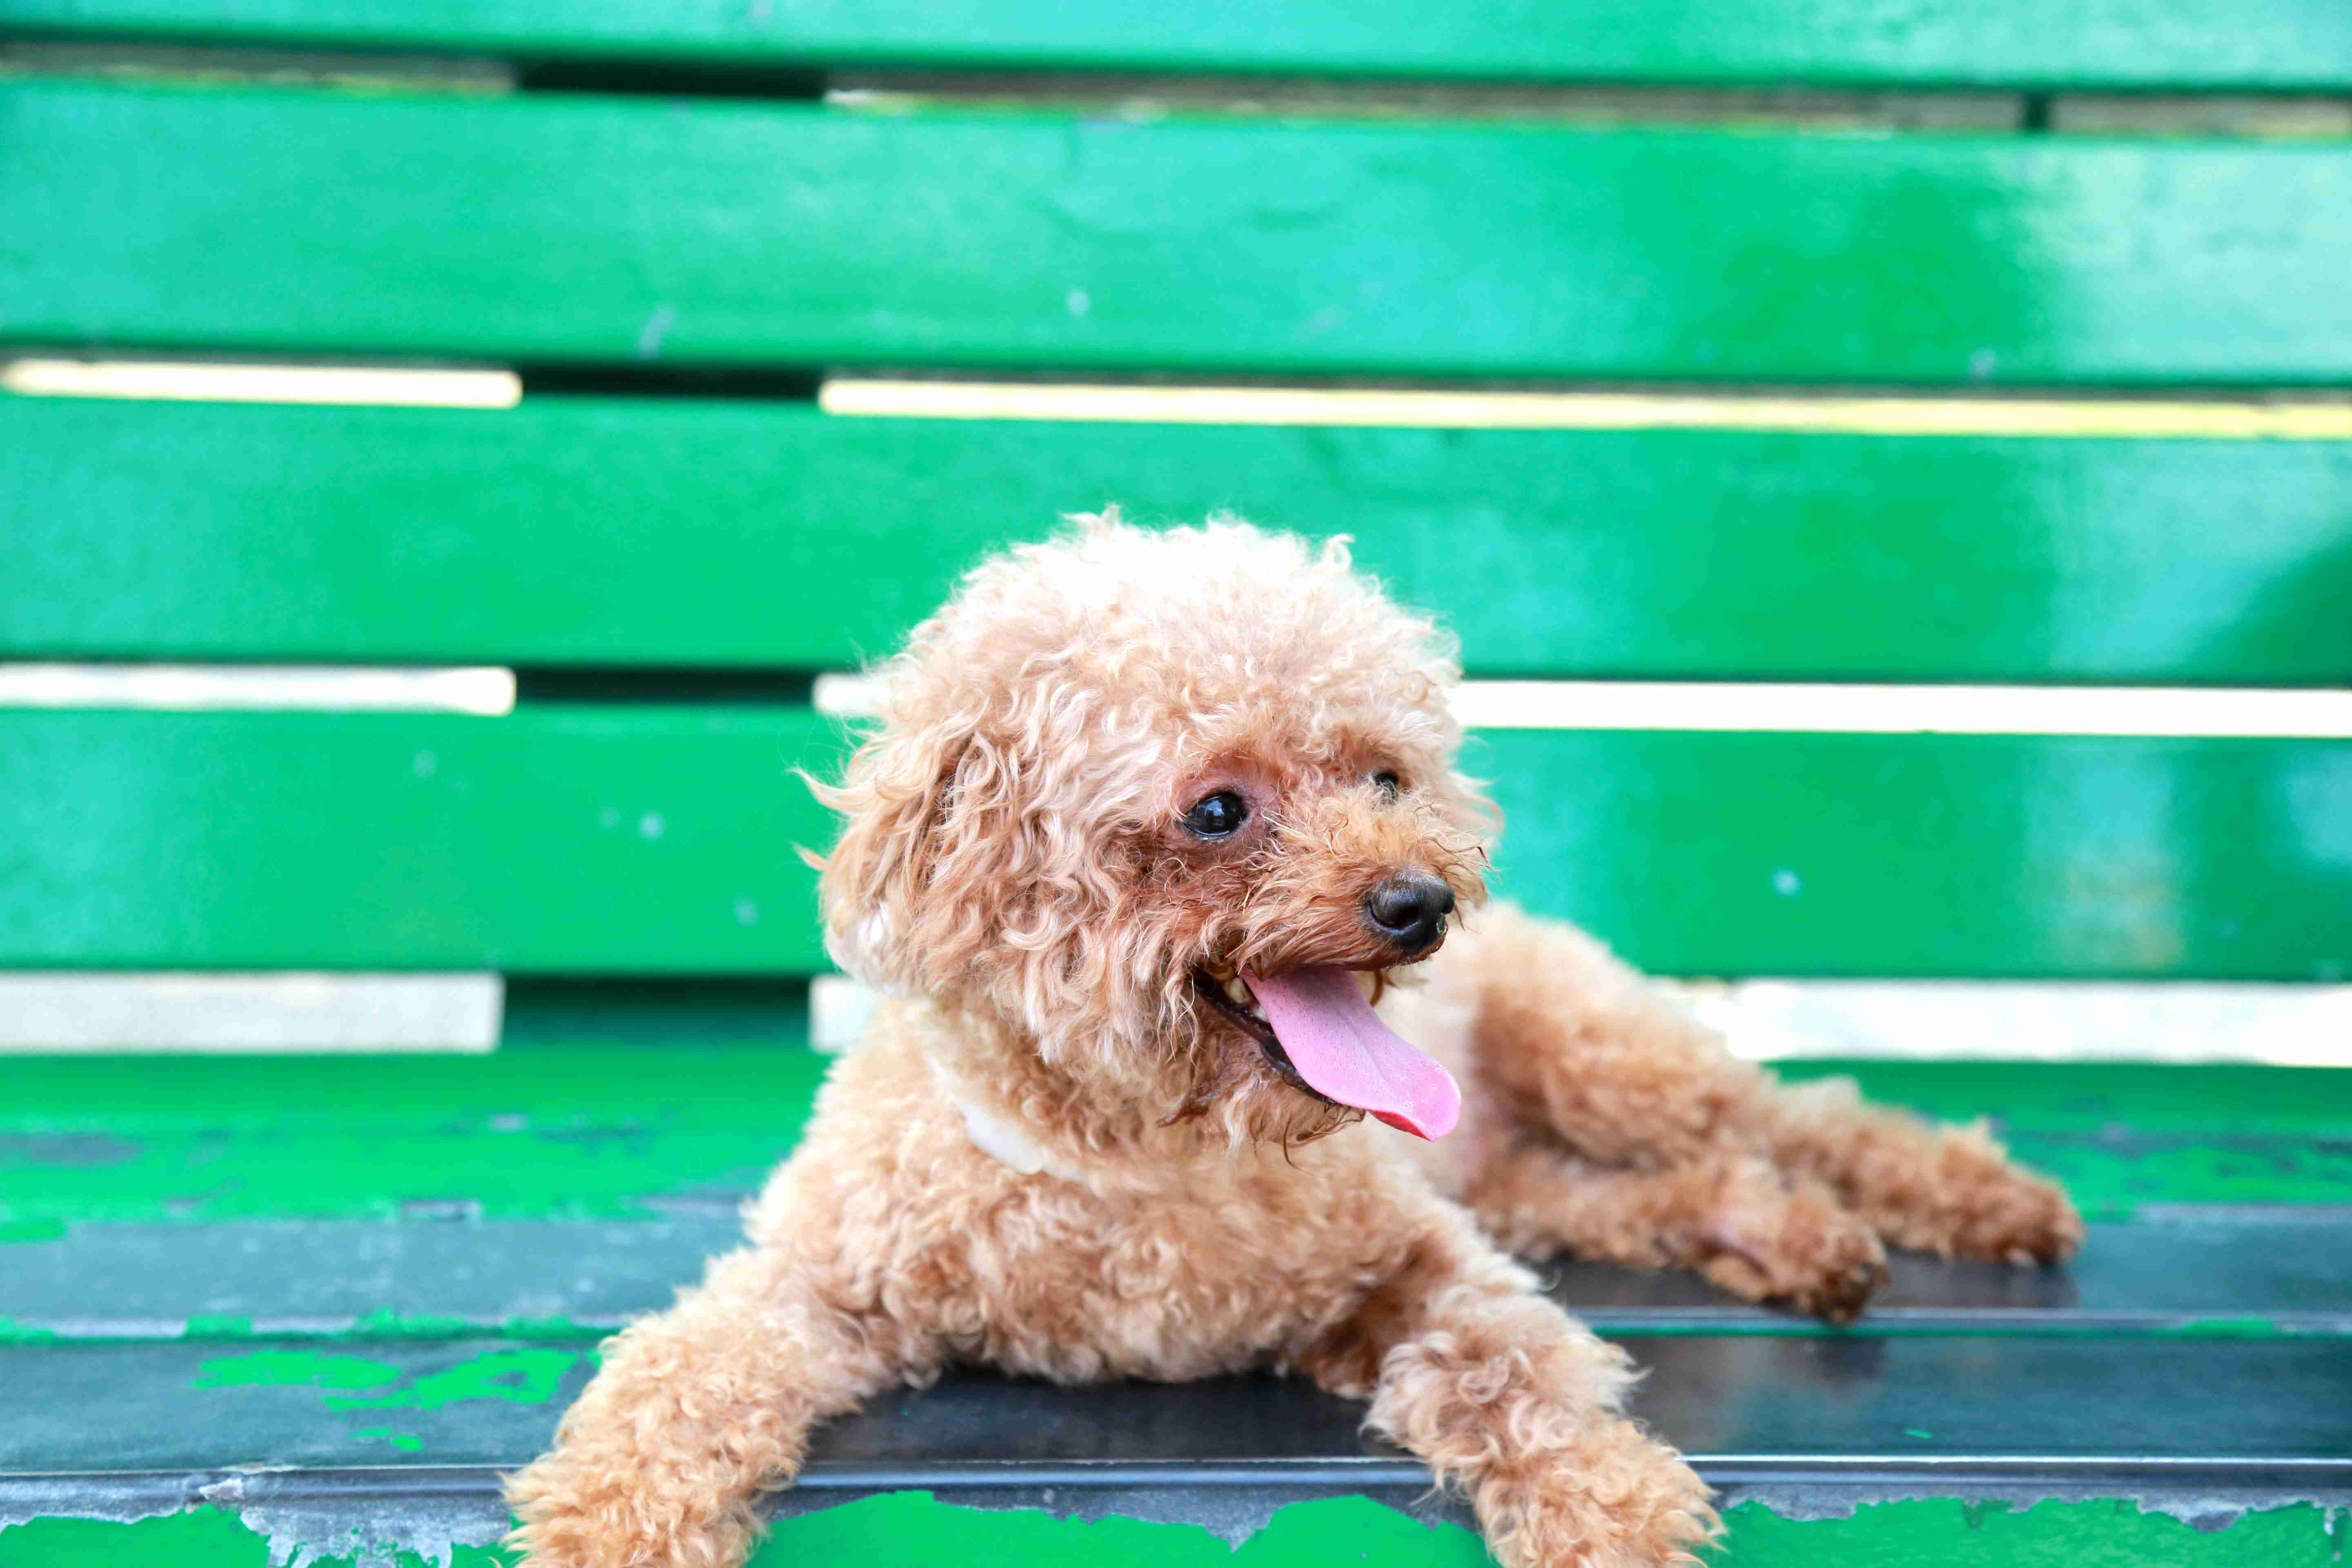 Can Poodles develop autoimmune disorders? How can these conditions be managed?